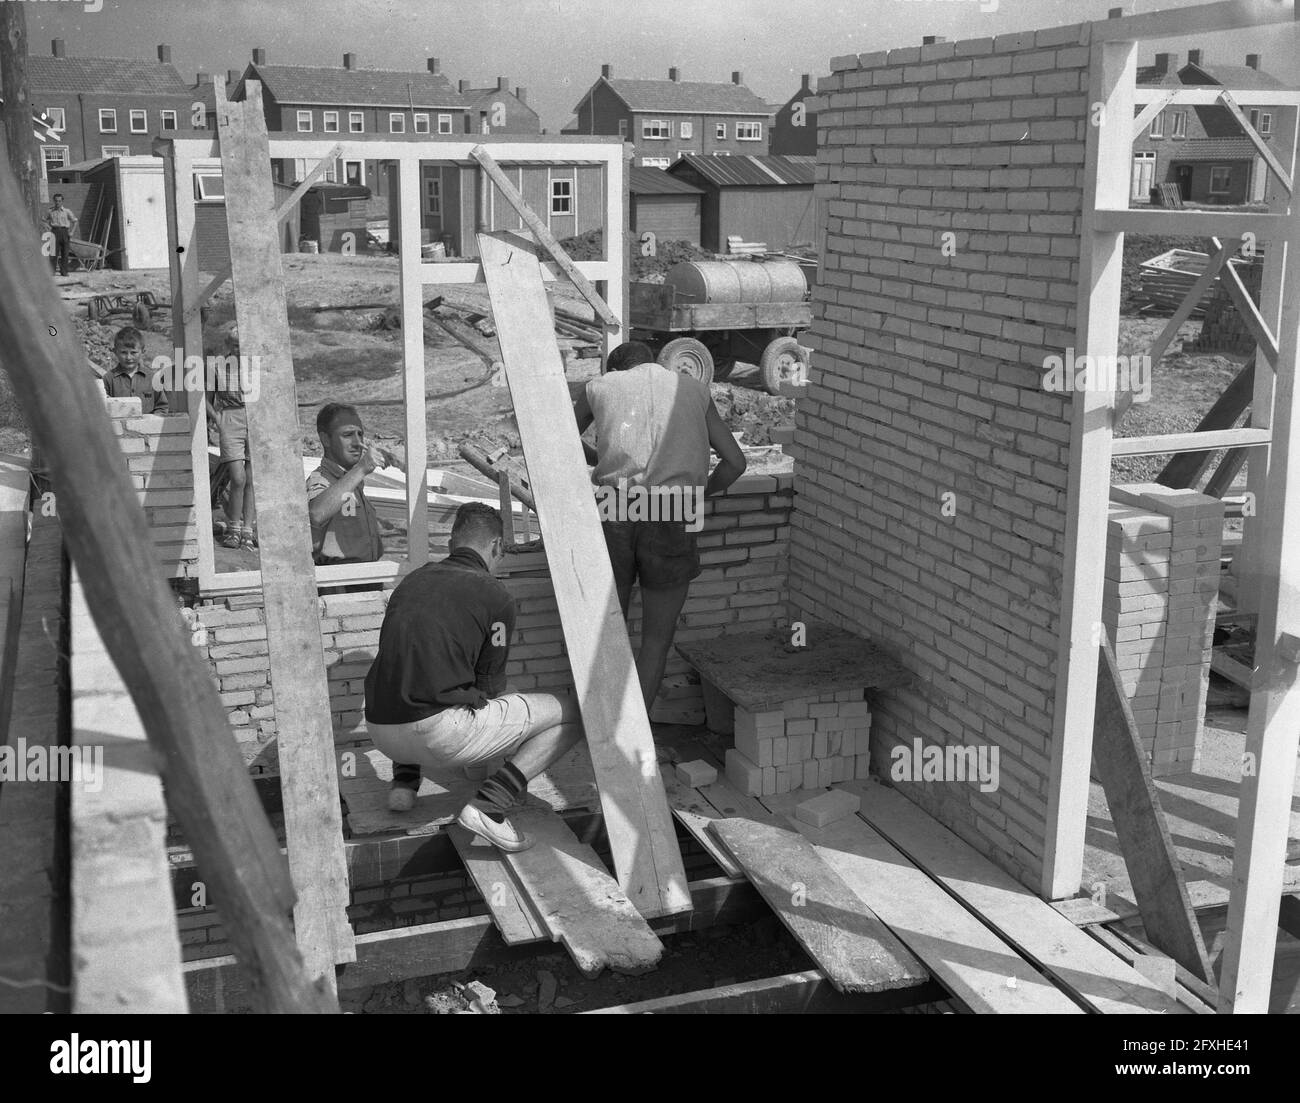 Volunteers including foreign youngsters help construction in Zeeland, at Nieuwerkerk Schouwen Duiveland, August 30, 1955, FREEWILLERS, The Netherlands, 20th century press agency photo, news to remember, documentary, historic photography 1945-1990, visual stories, human history of the Twentieth Century, capturing moments in time Stock Photo